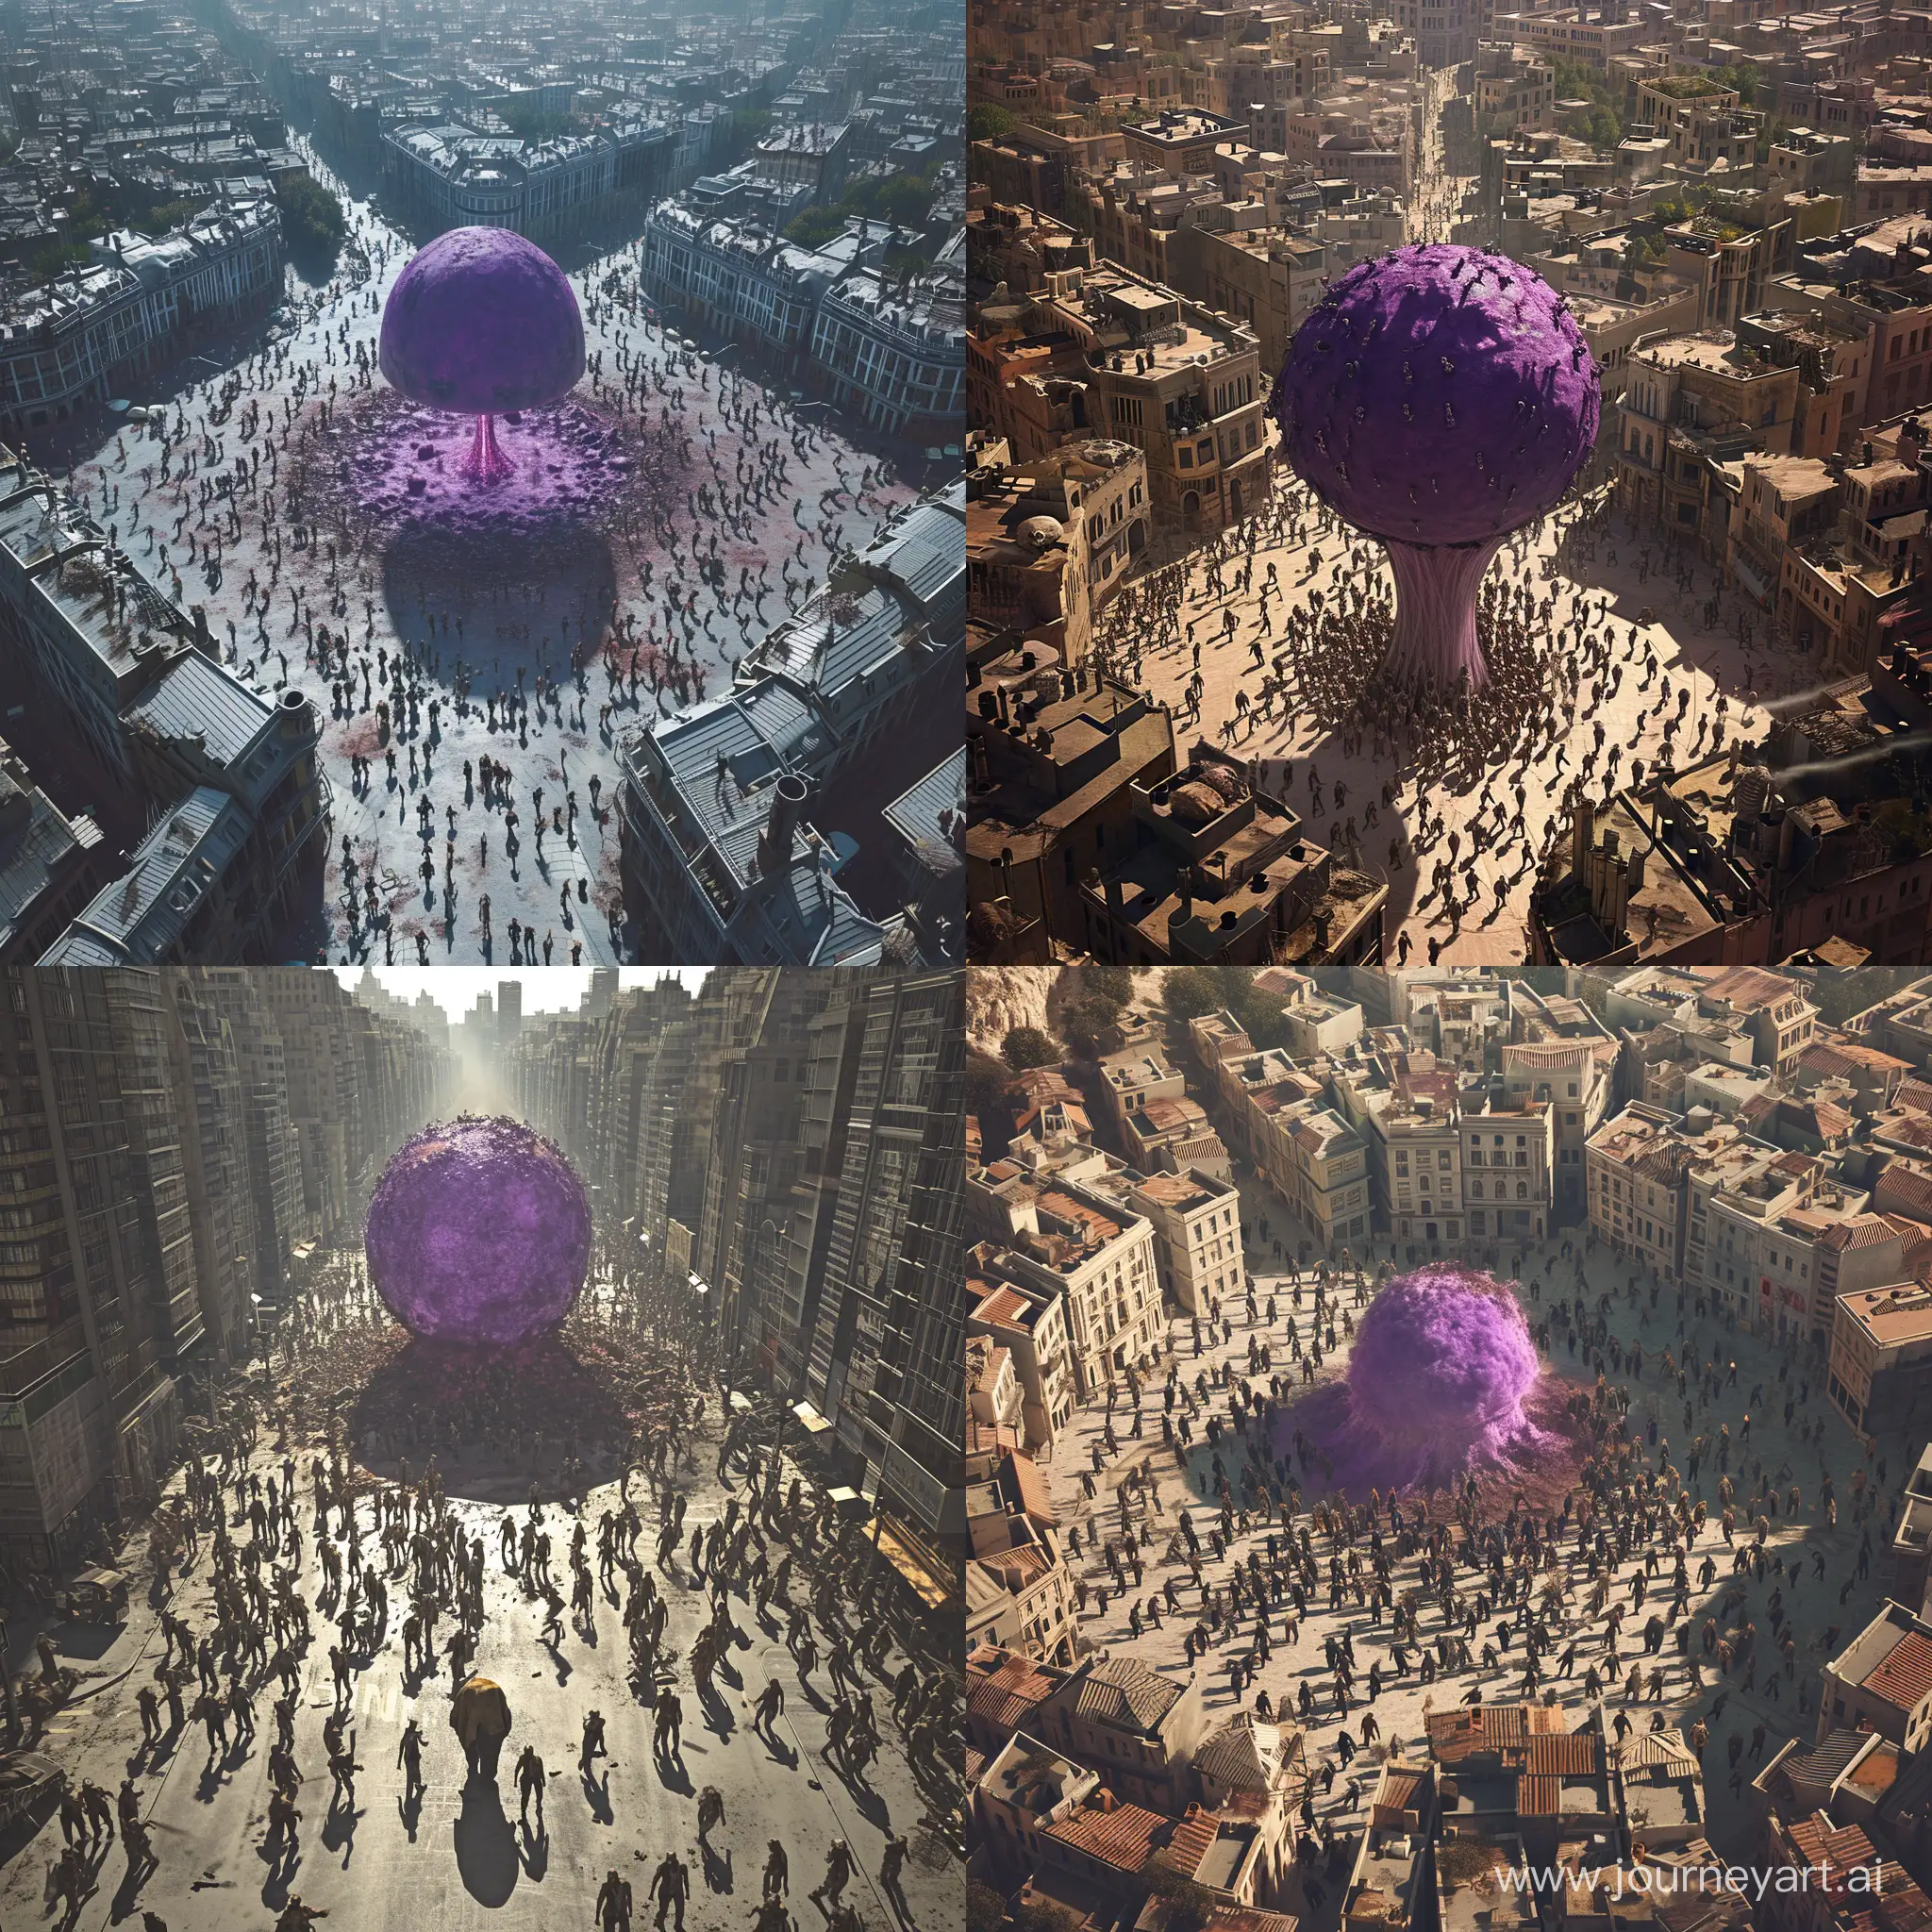 A large city with zombies walking through the streets. In the center is a purple nuclear mushroom.